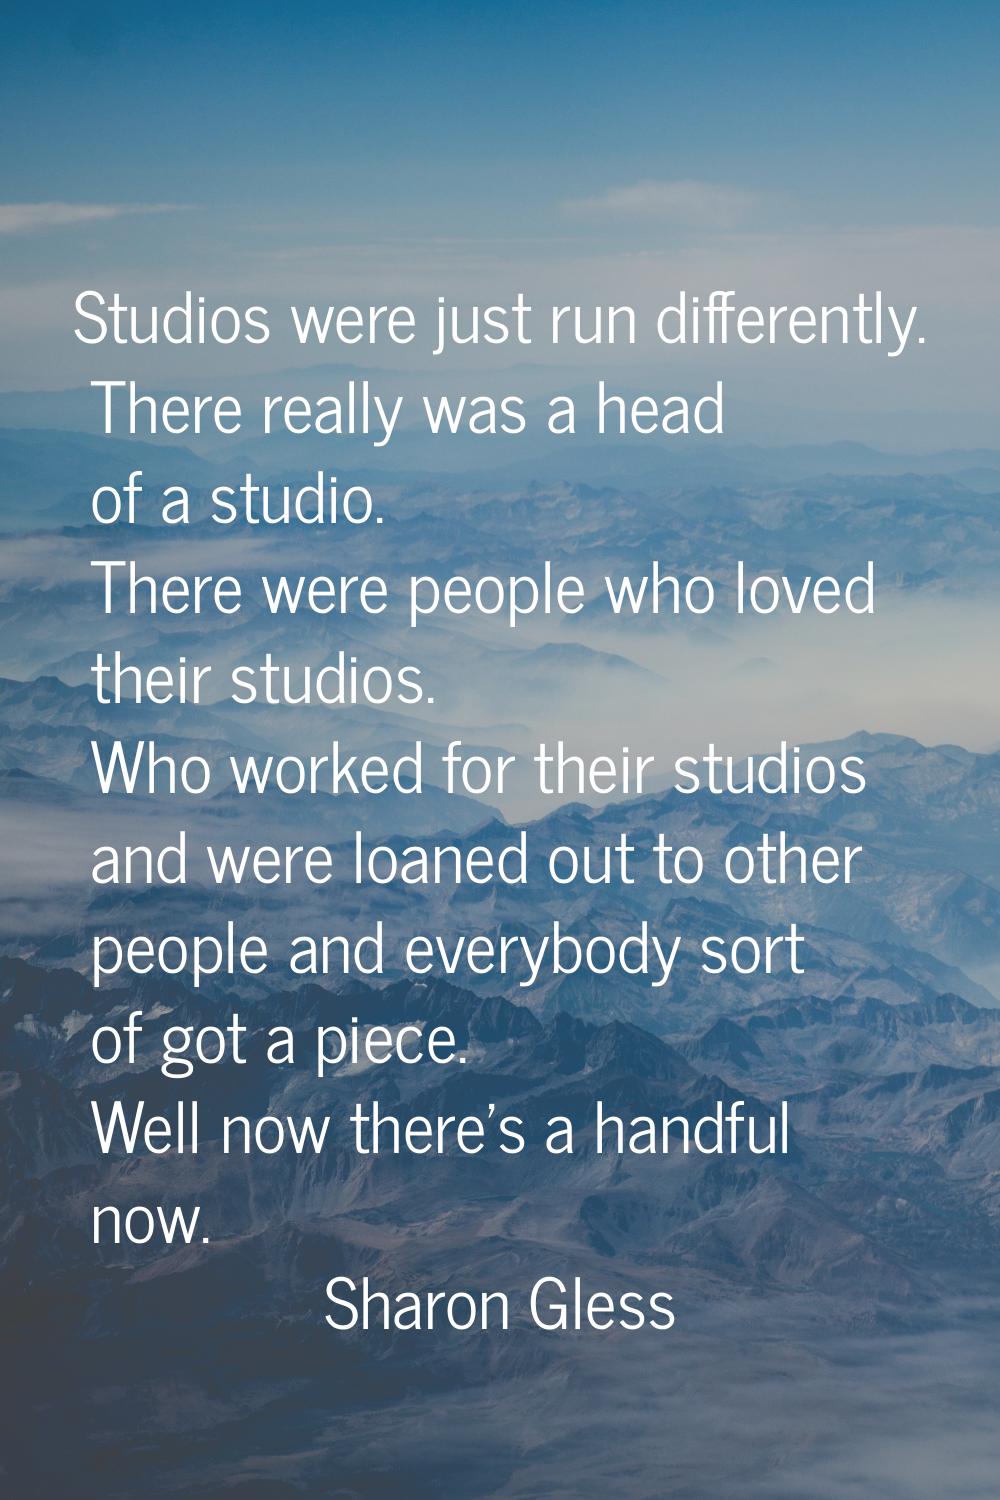 Studios were just run differently. There really was a head of a studio. There were people who loved